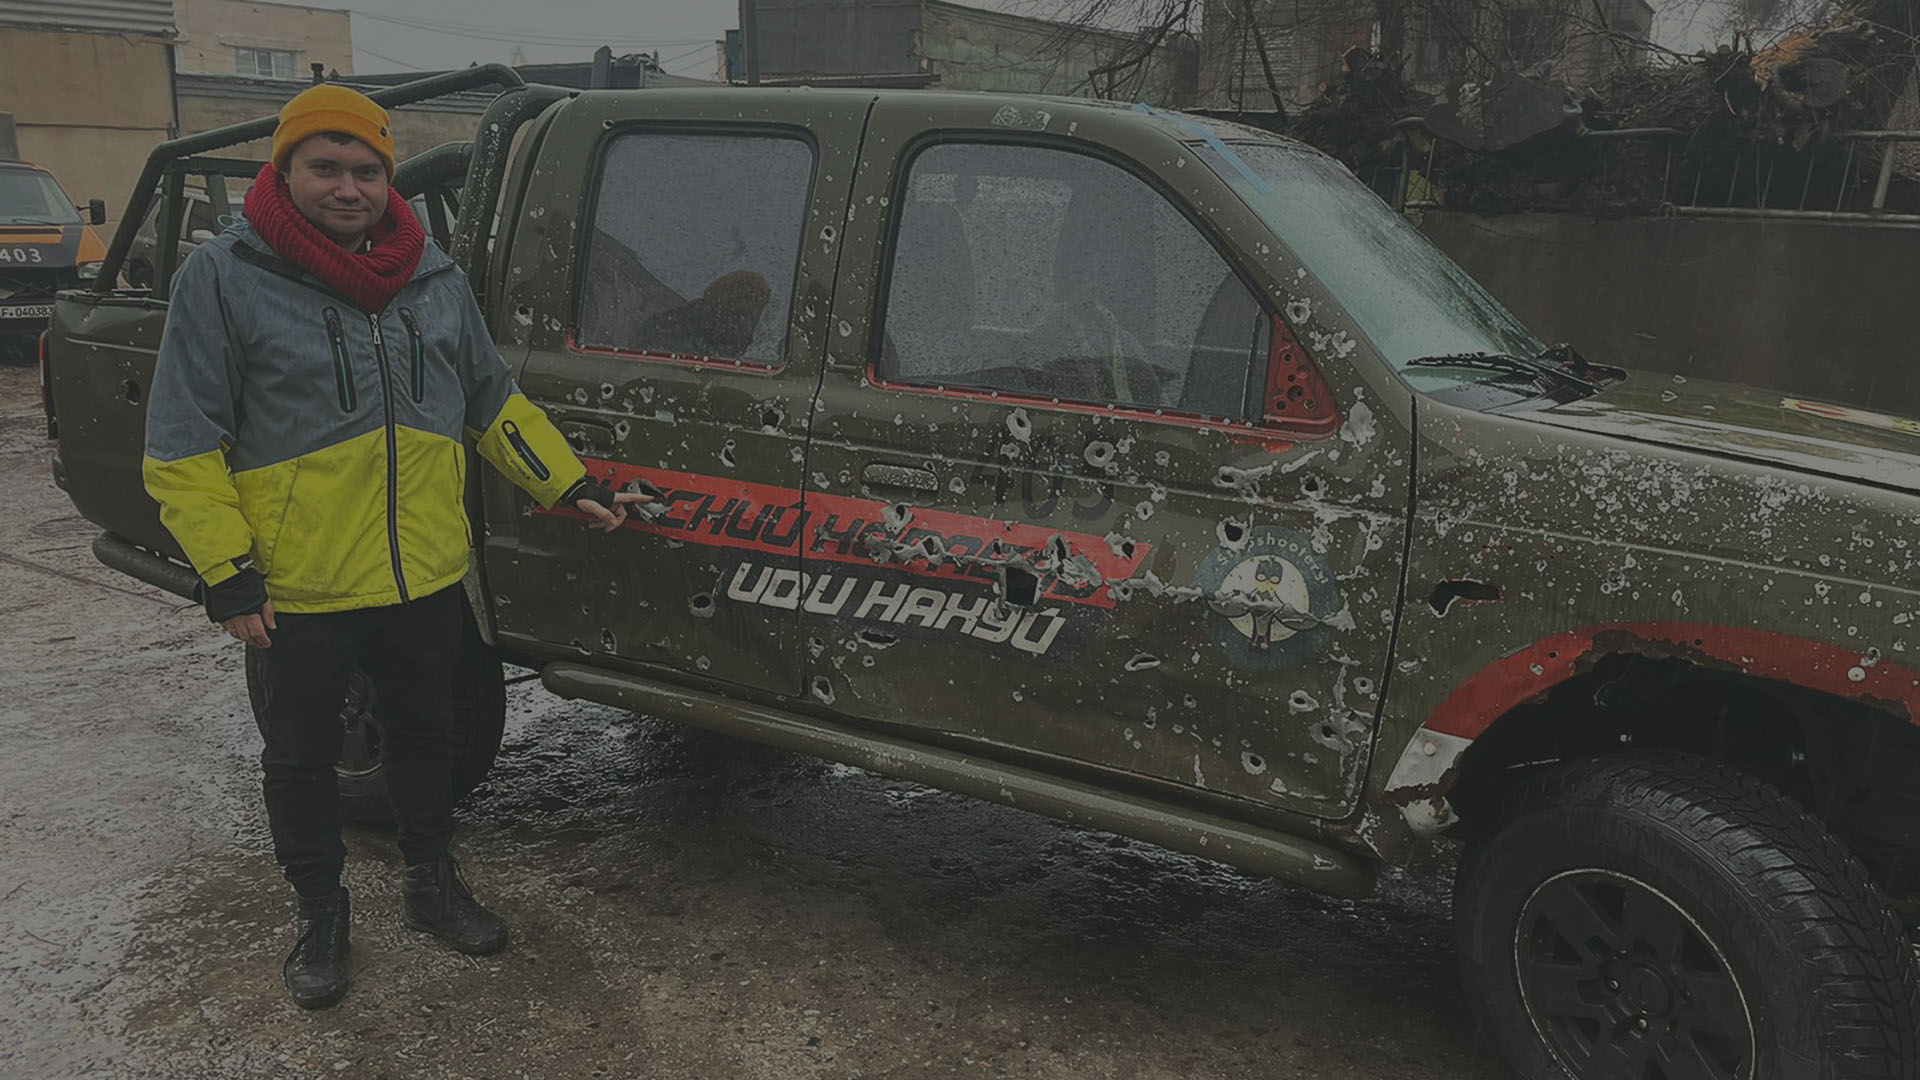 A picture of a shelled car, which was donated to Car for Ukraine and utilized on the Ukrainian front lines.